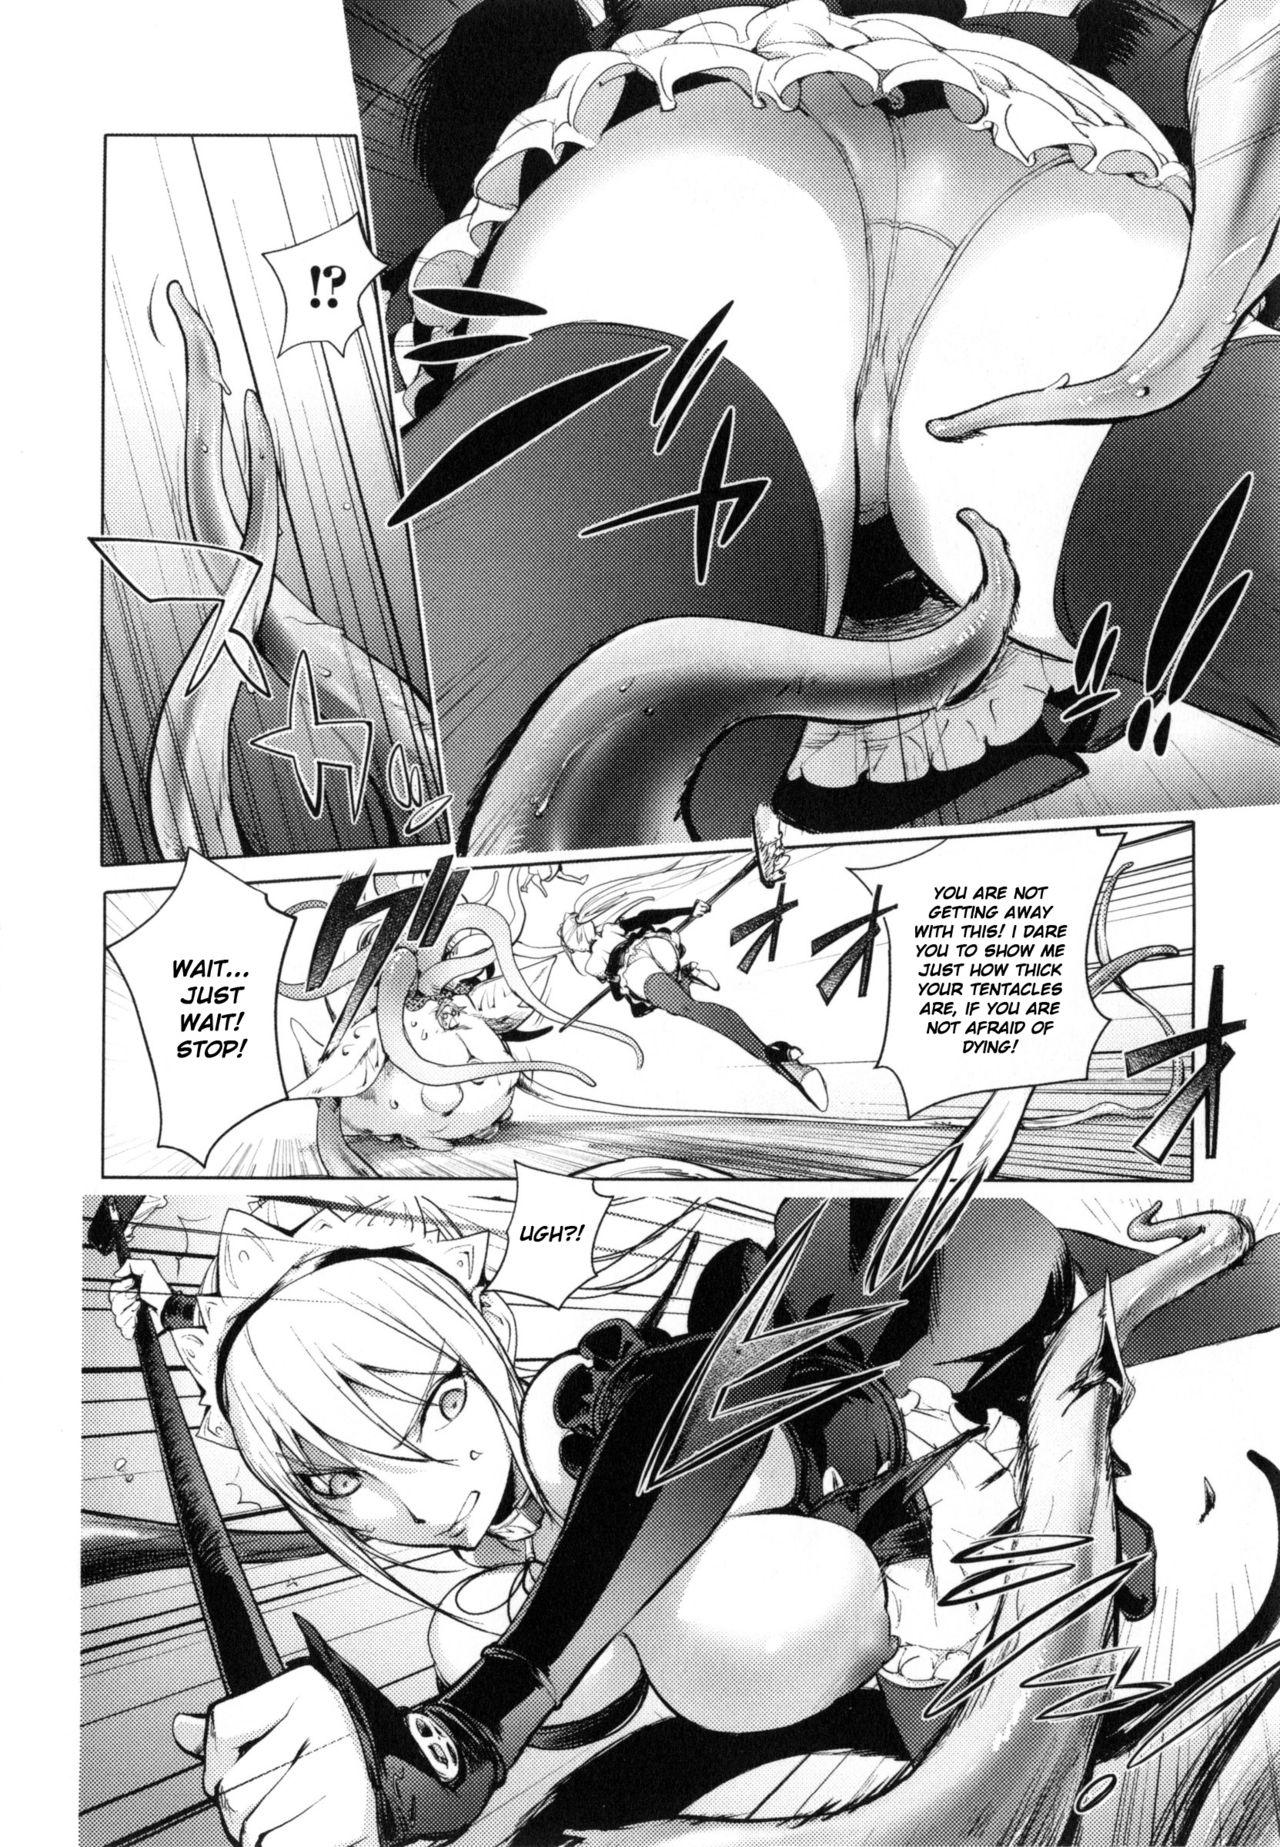 Gostosas Shokushu Ouji | The Adventures Of The Three Heroes: Chapter 5 - The Tentacle Prince Gonzo - Page 8